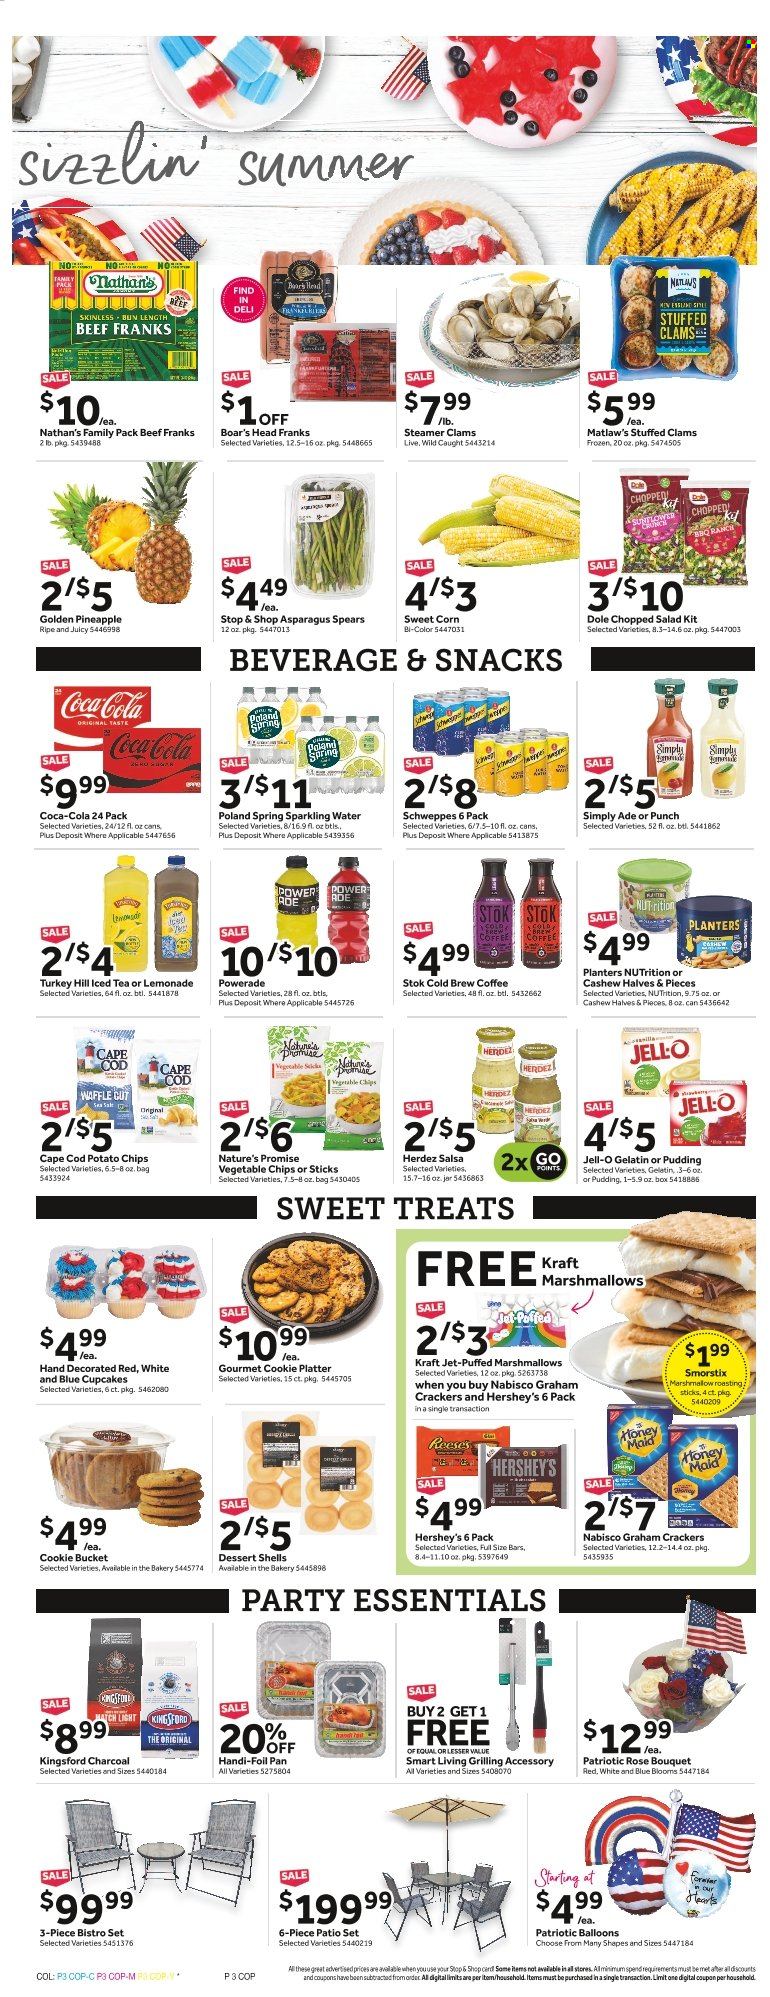 thumbnail - Stop & Shop Flyer - 05/27/2022 - 06/02/2022 - Sales products - Nature’s Promise, cupcake, dessert shells, asparagus, corn, salad, Dole, sweet corn, chopped salad, pineapple, clams, cod, Kraft®, pudding, Hershey's, graham crackers, marshmallows, snack, crackers, potato chips, vegetable chips, Jell-O, Honey Maid, salsa, Planters, Coca-Cola, lemonade, Schweppes, Powerade, ice tea, sparkling water, coffee, rosé wine, Jet, balloons, bouquet, rose, charcoal. Page 3.